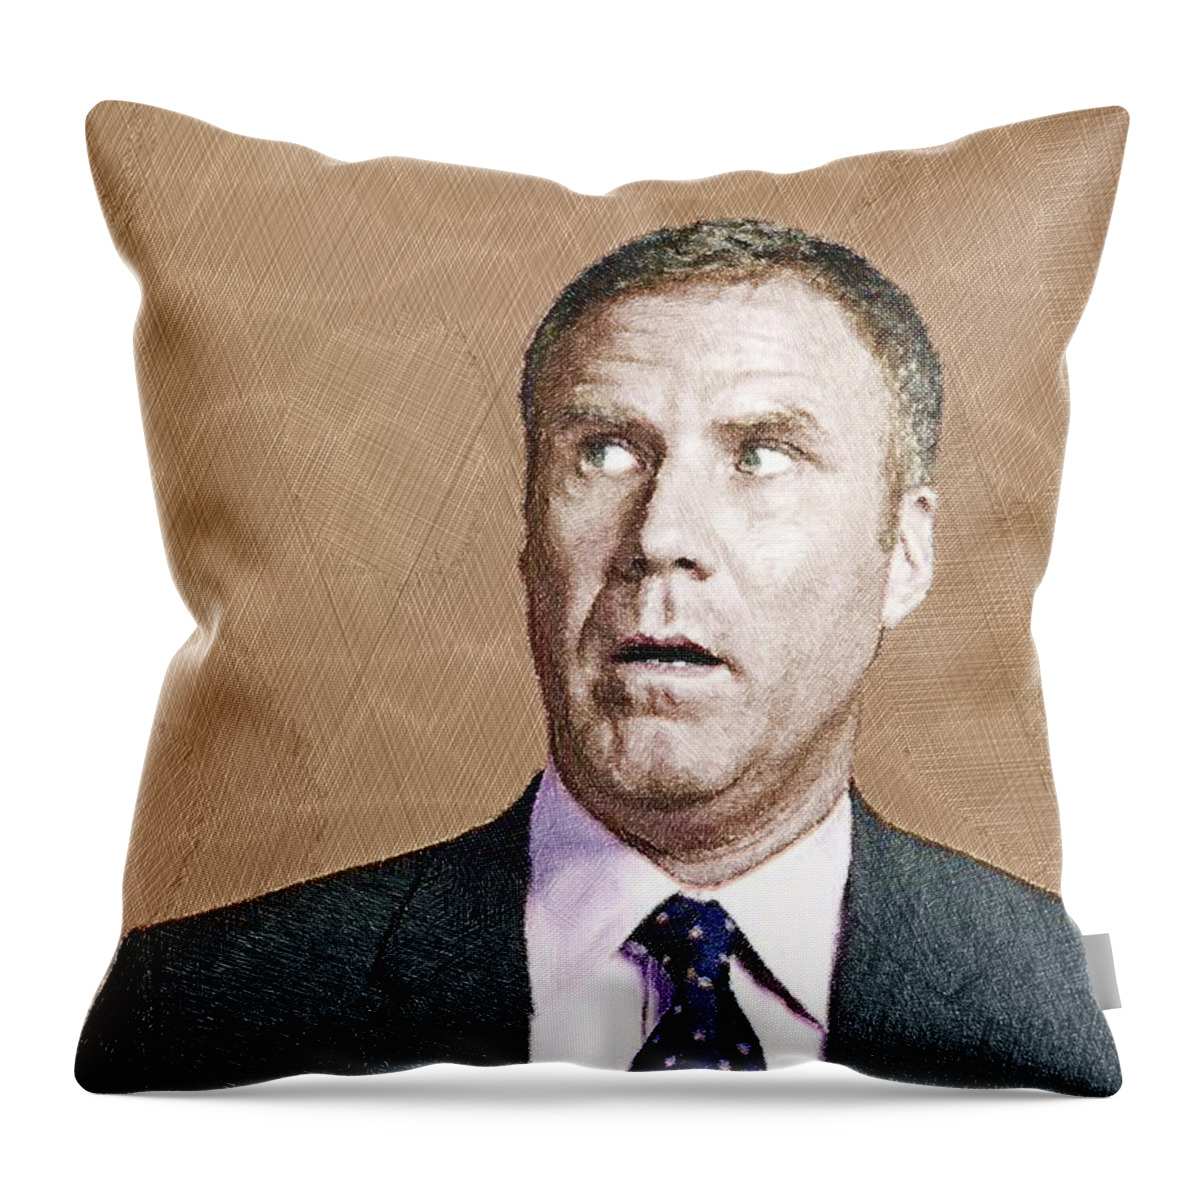 Anchorman Throw Pillow featuring the painting Will Ferrell by Tony Rubino